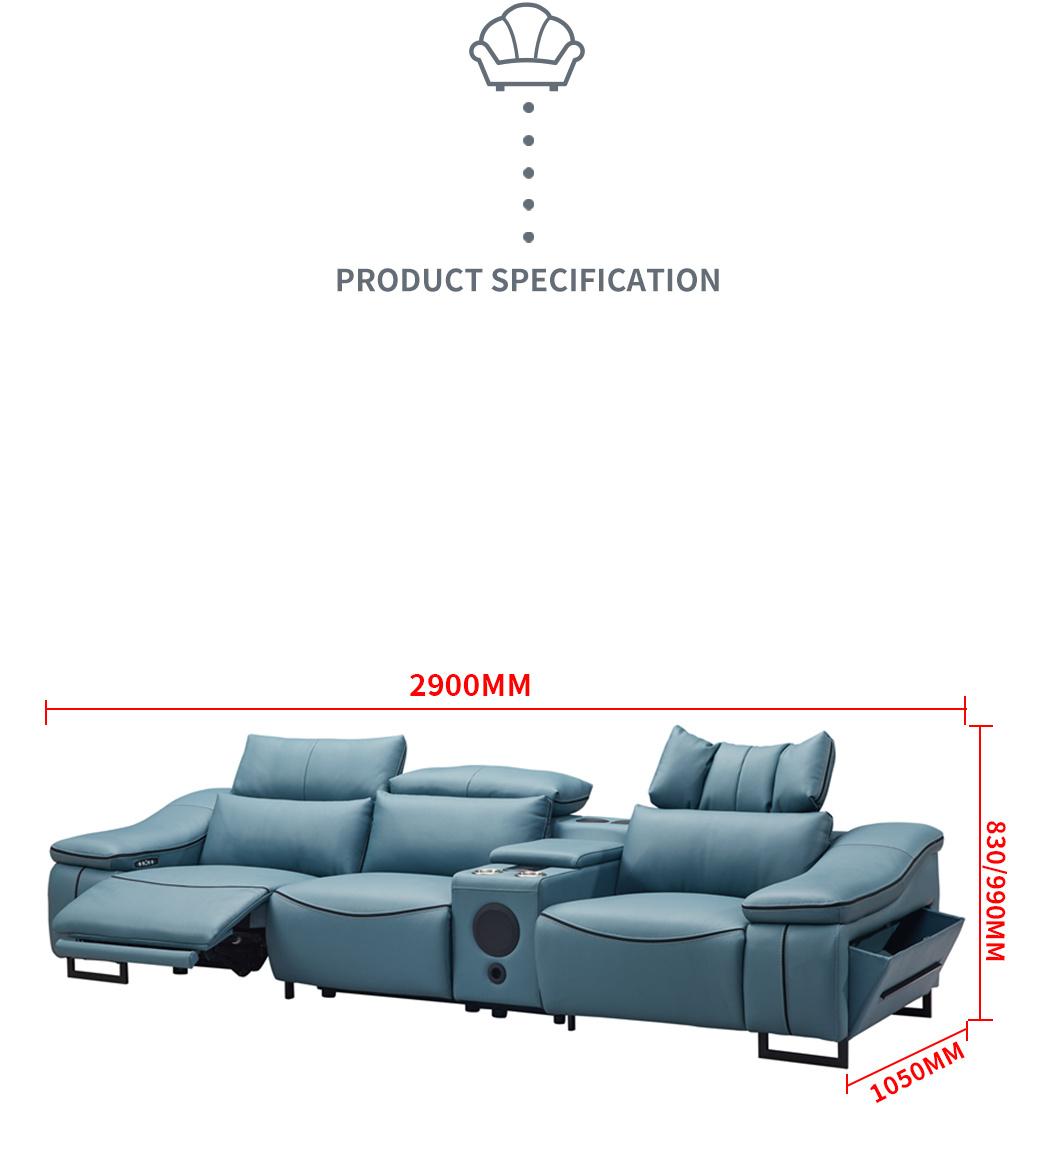 Simple Design Living Room Sectional Recliner Sofa Home Furniture